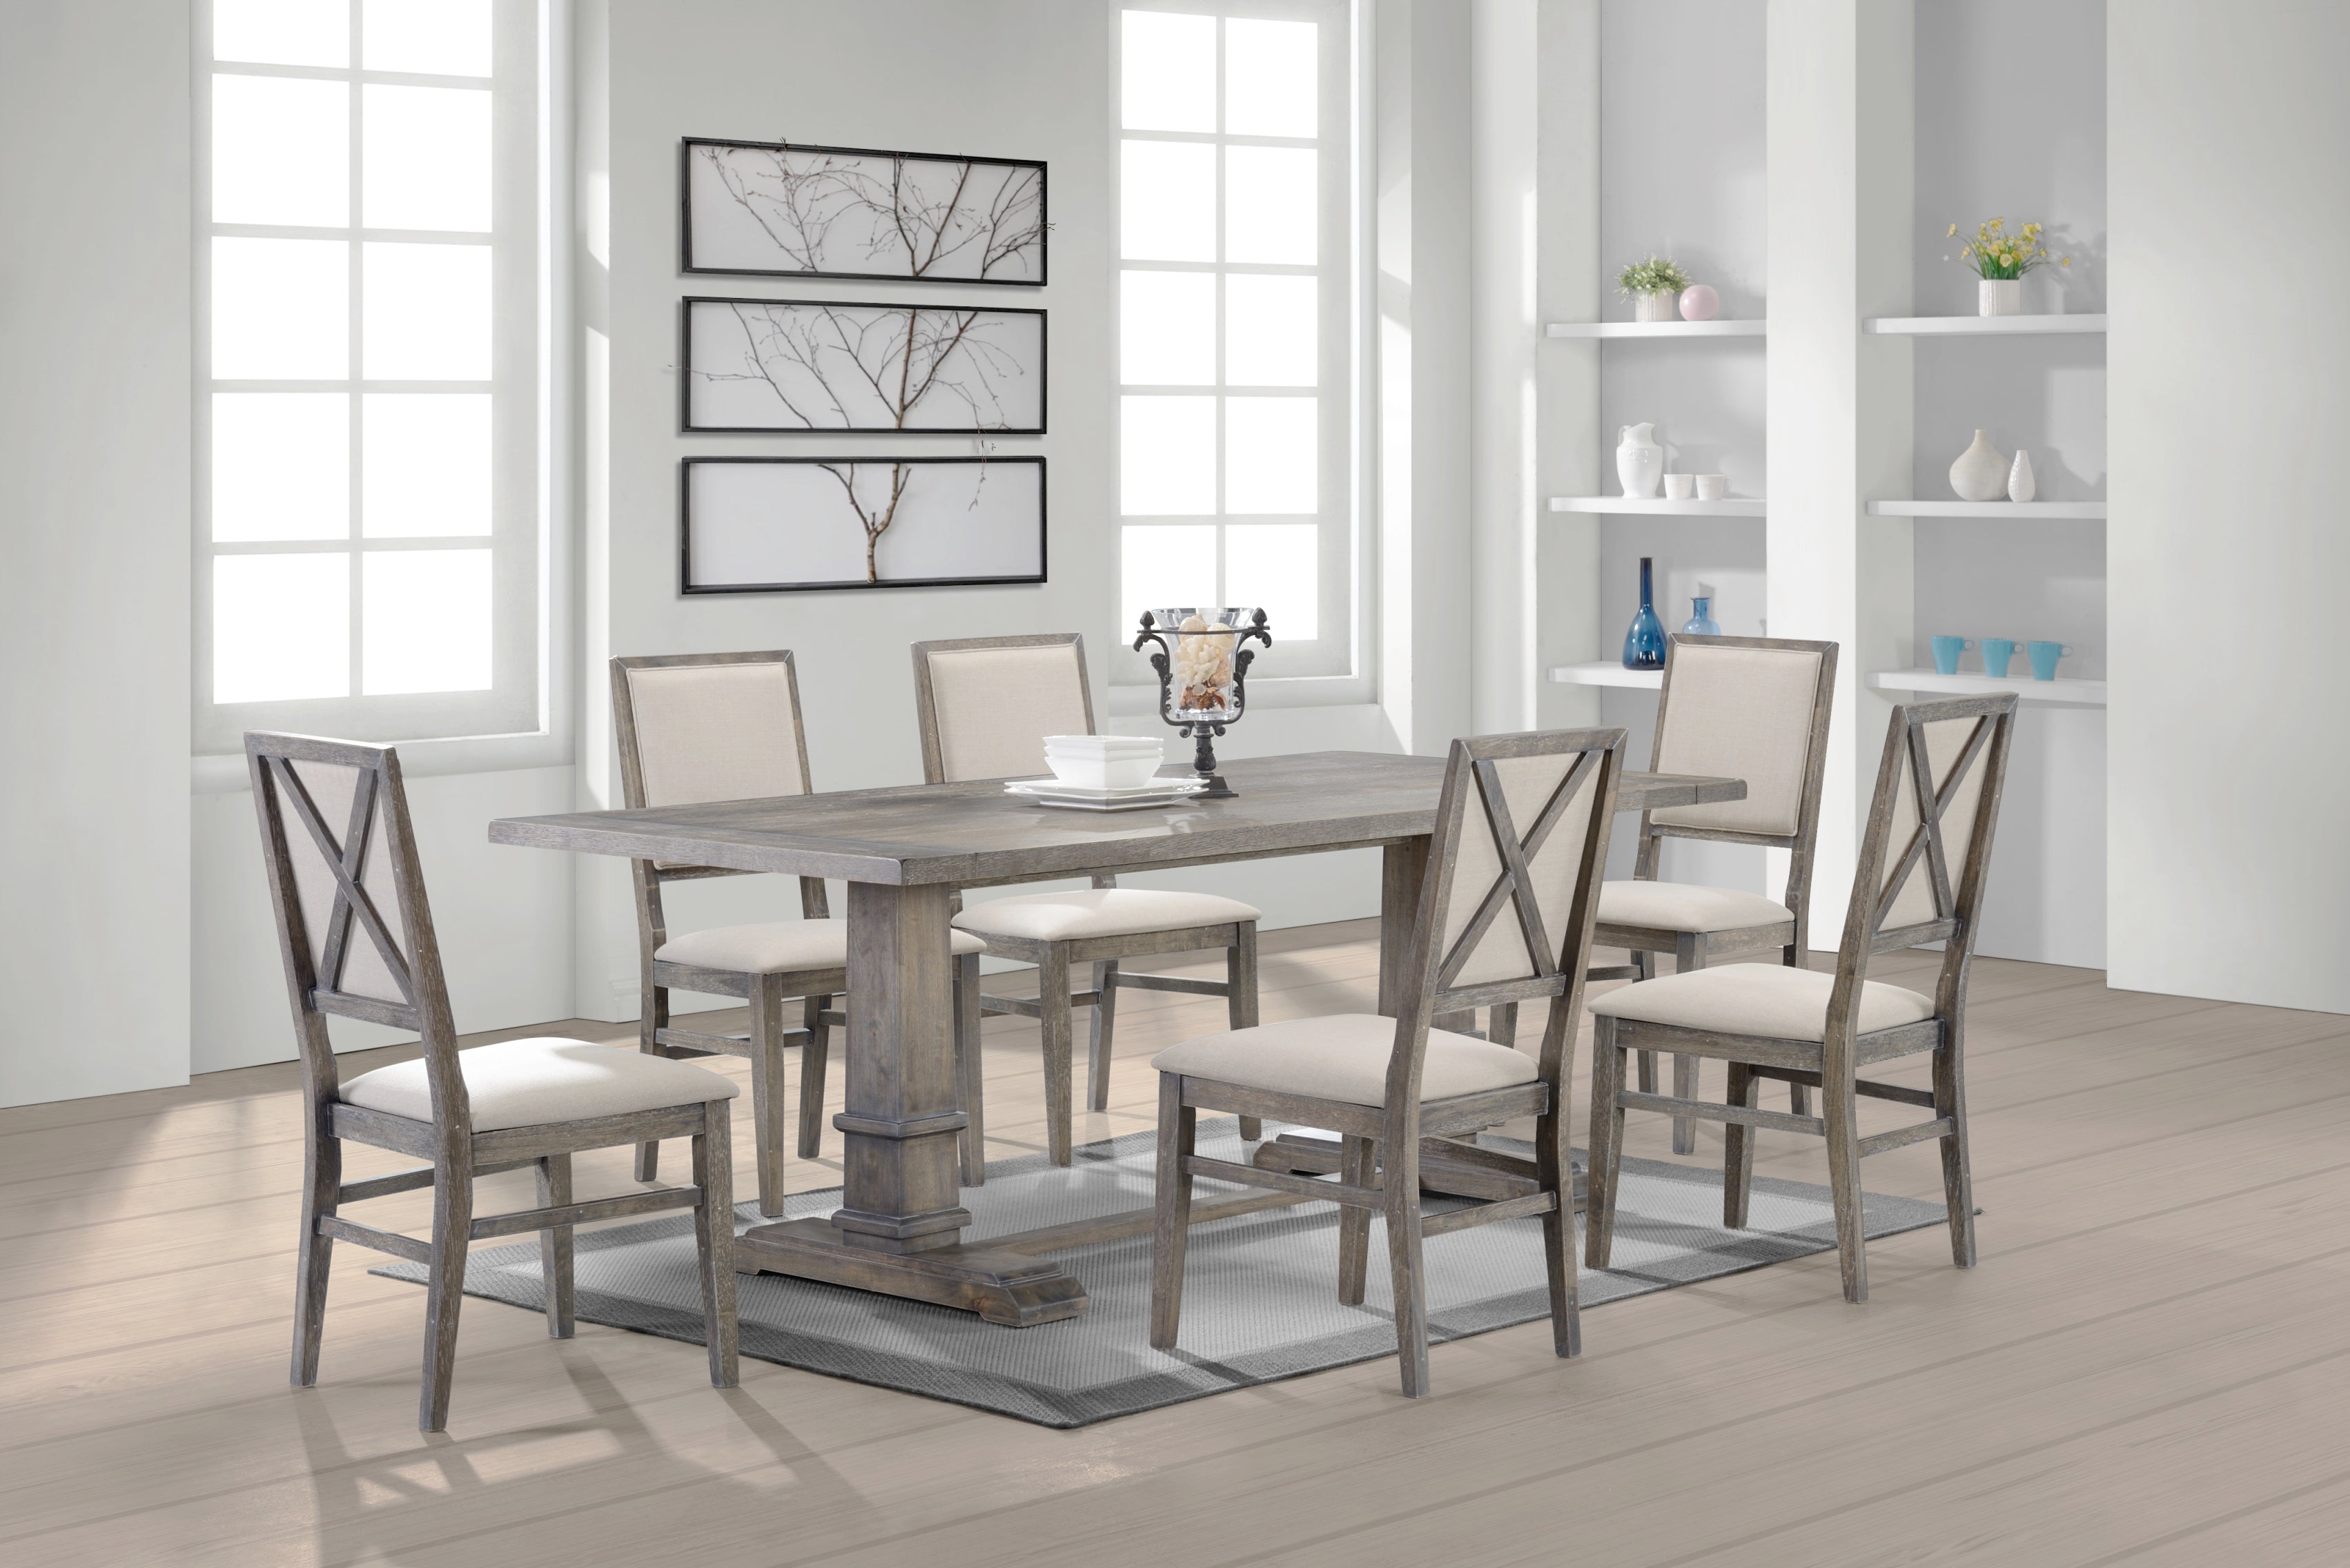 Beautiful Solid Dining Set with Rustic Finish